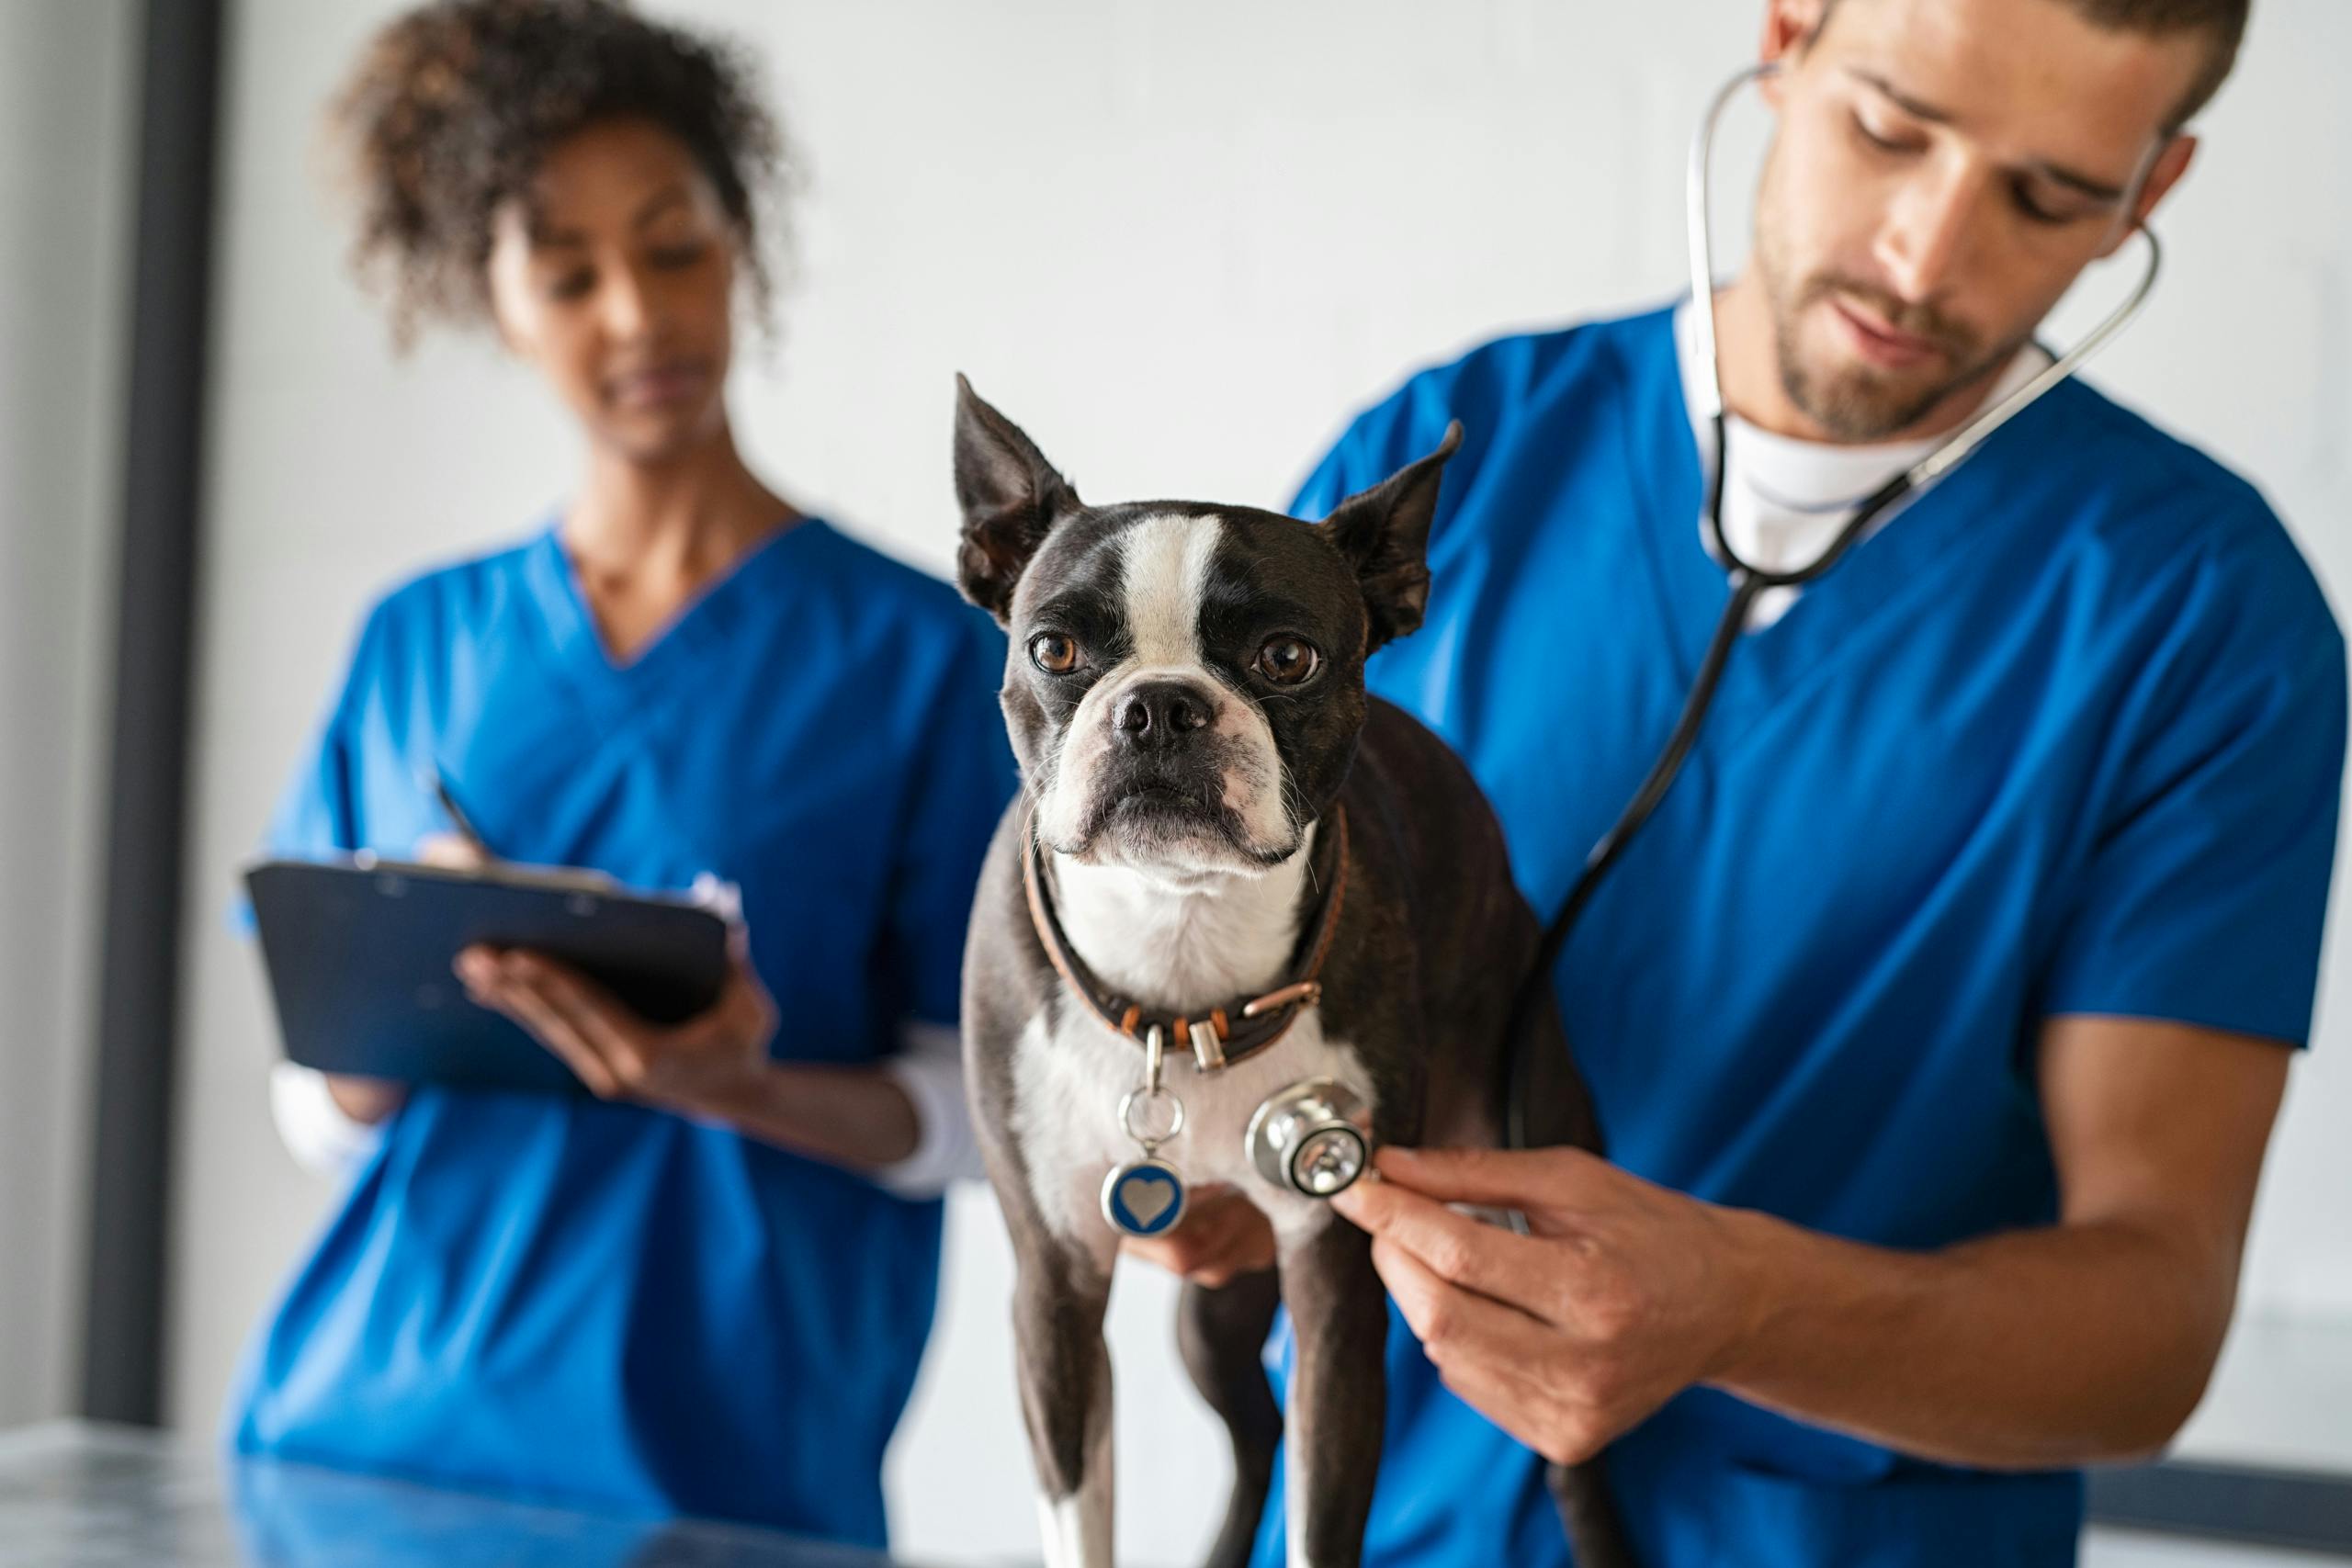 What is Pet Insurance? Why Do I Need It?